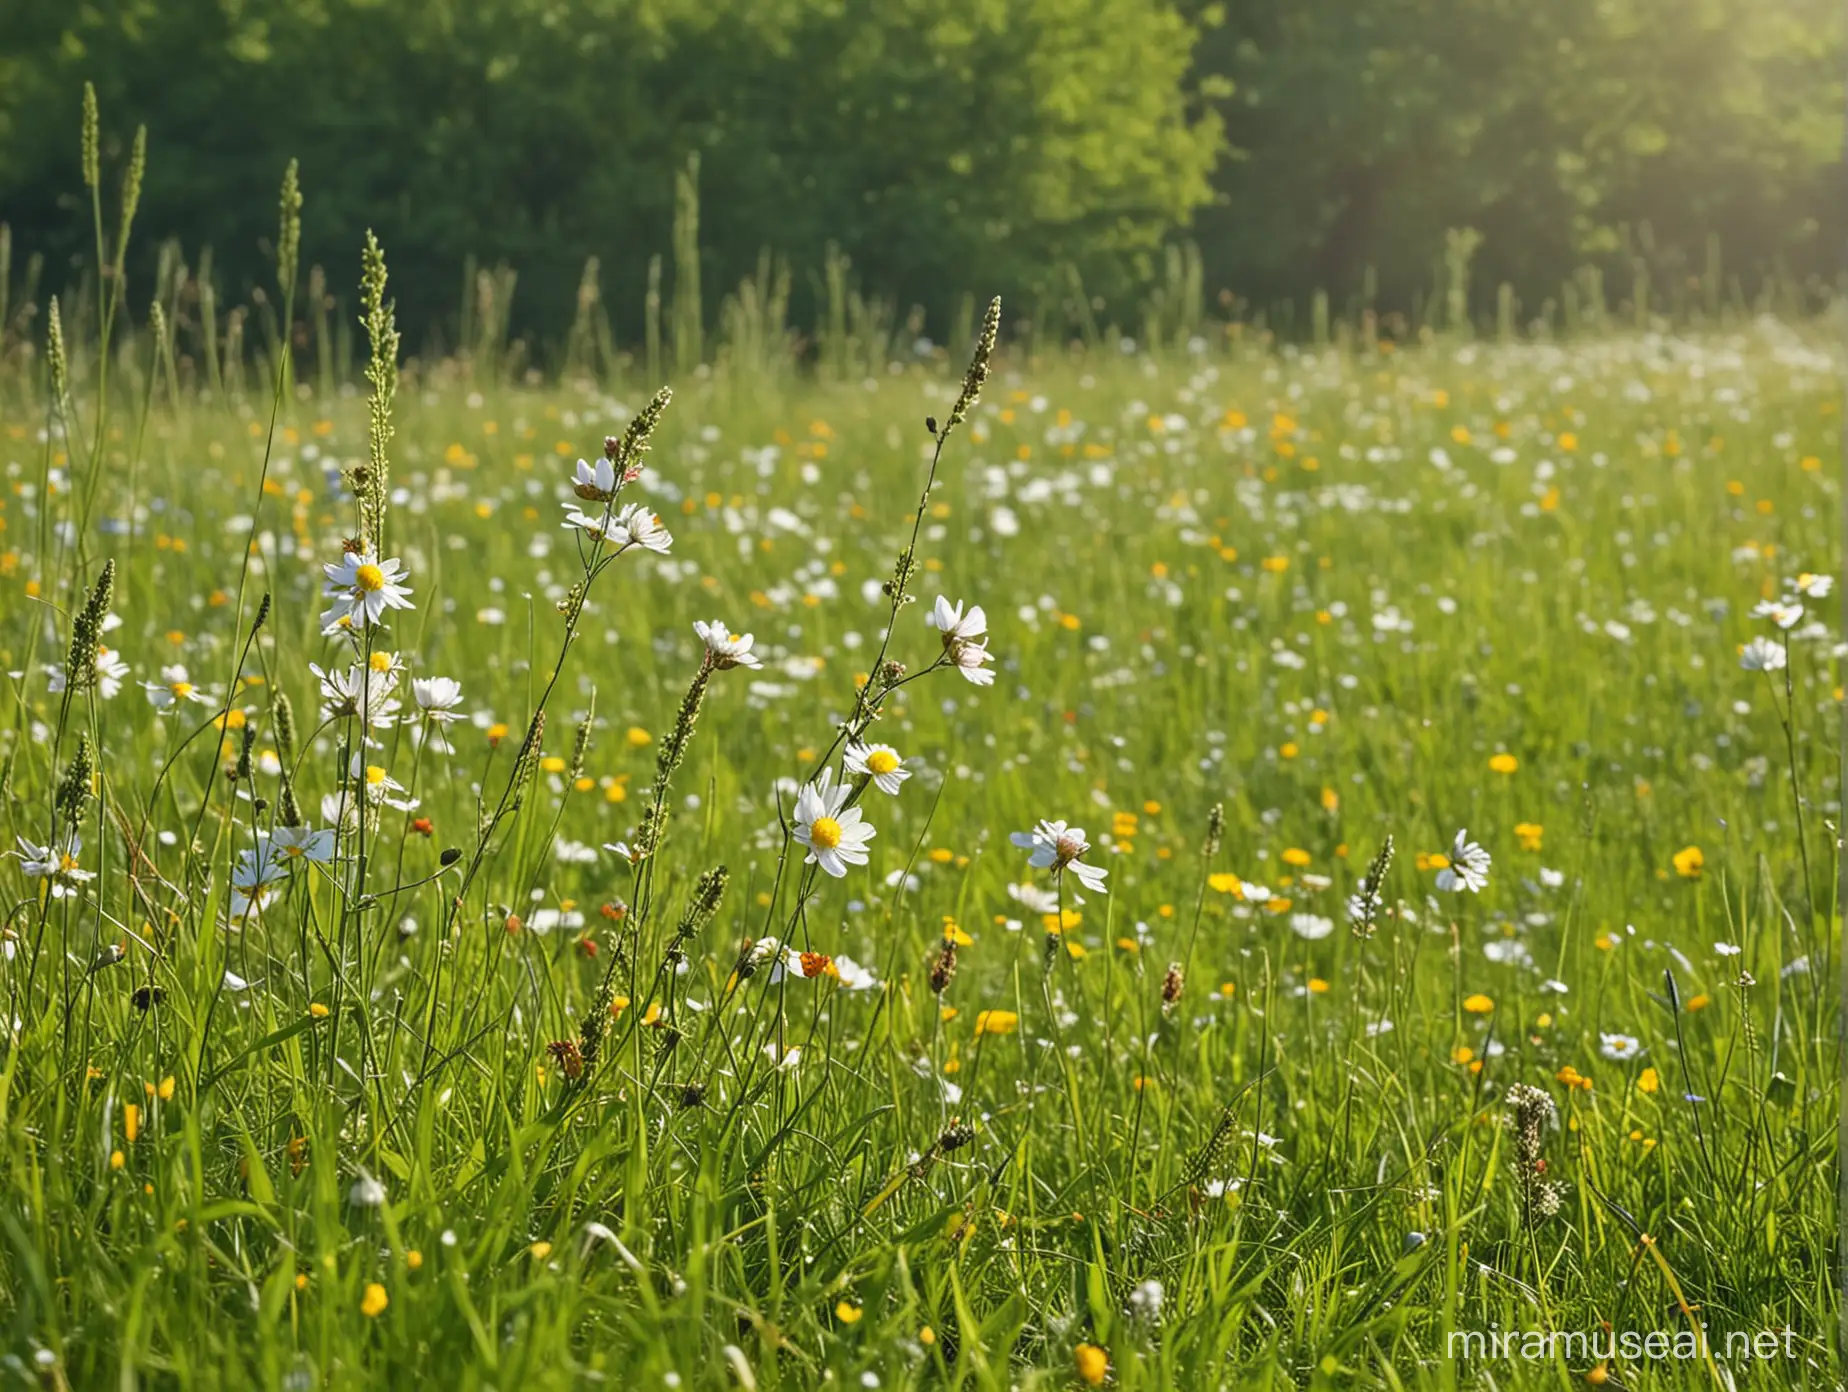 Joyful Family Outing in a Vibrant Spring Meadow